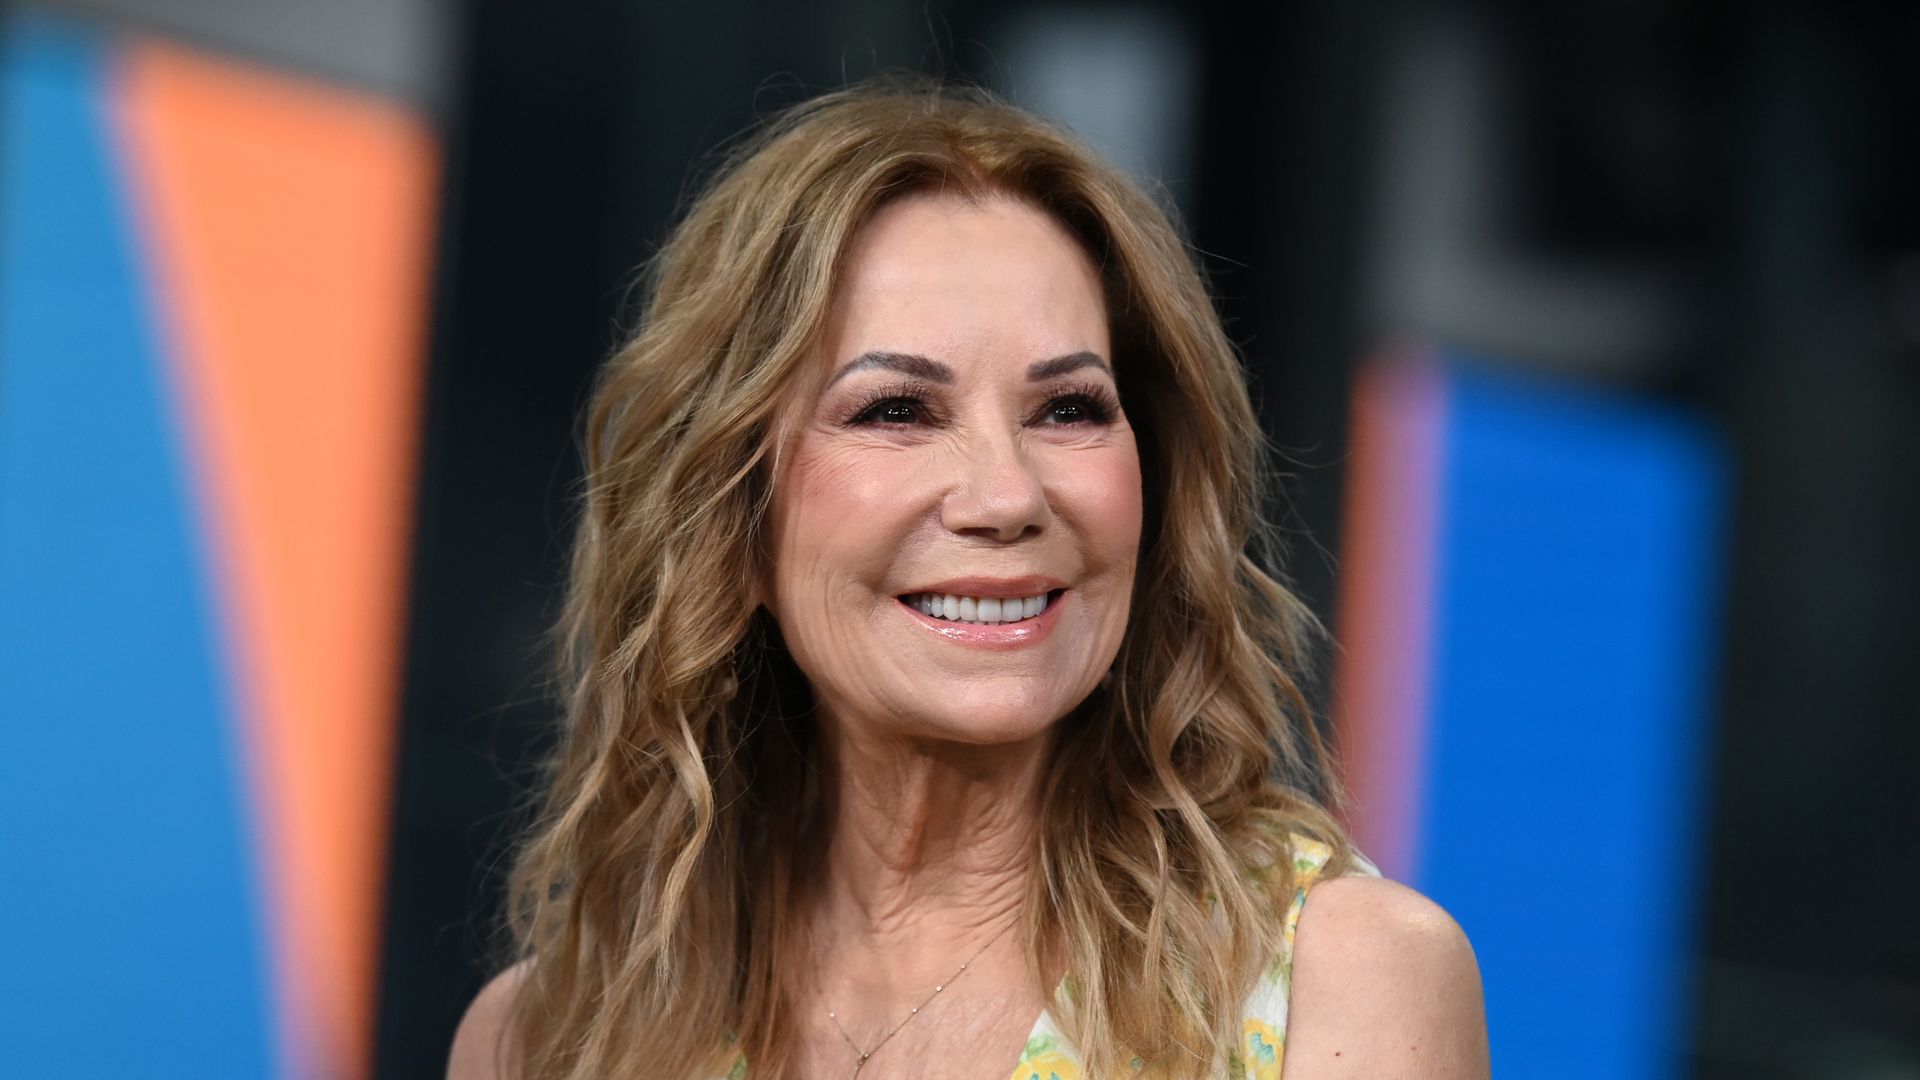 Kathie Lee Gifford visits "FOX & Friends" at Fox News Channel Studios on August 30, 2022 in New York City